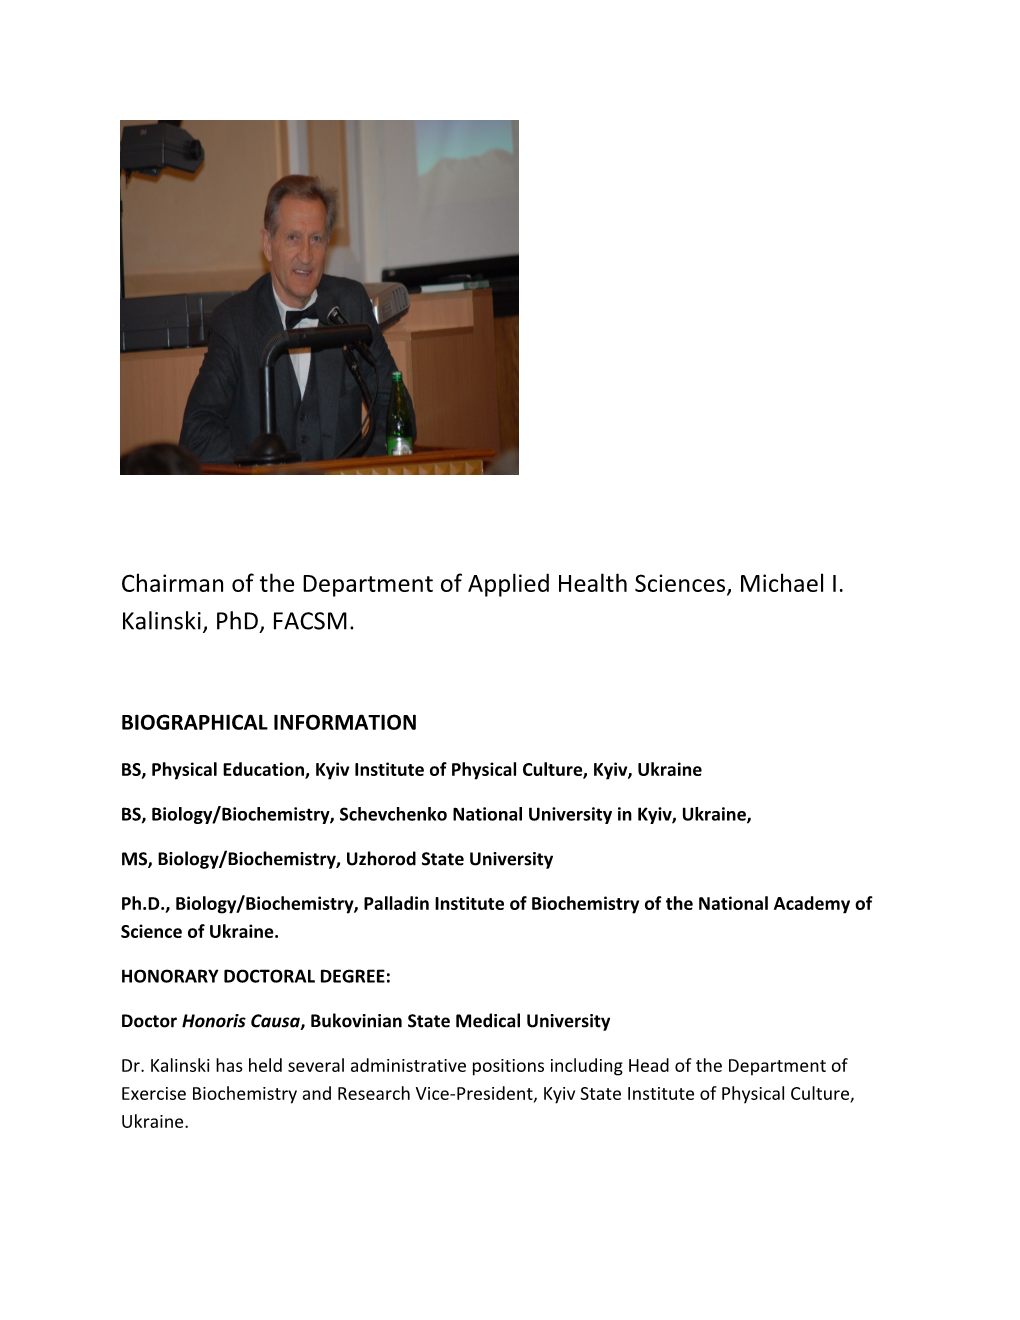 Chairman of the Department of Applied Health Sciences, Michael I. Kalinski, Phd, FACSM